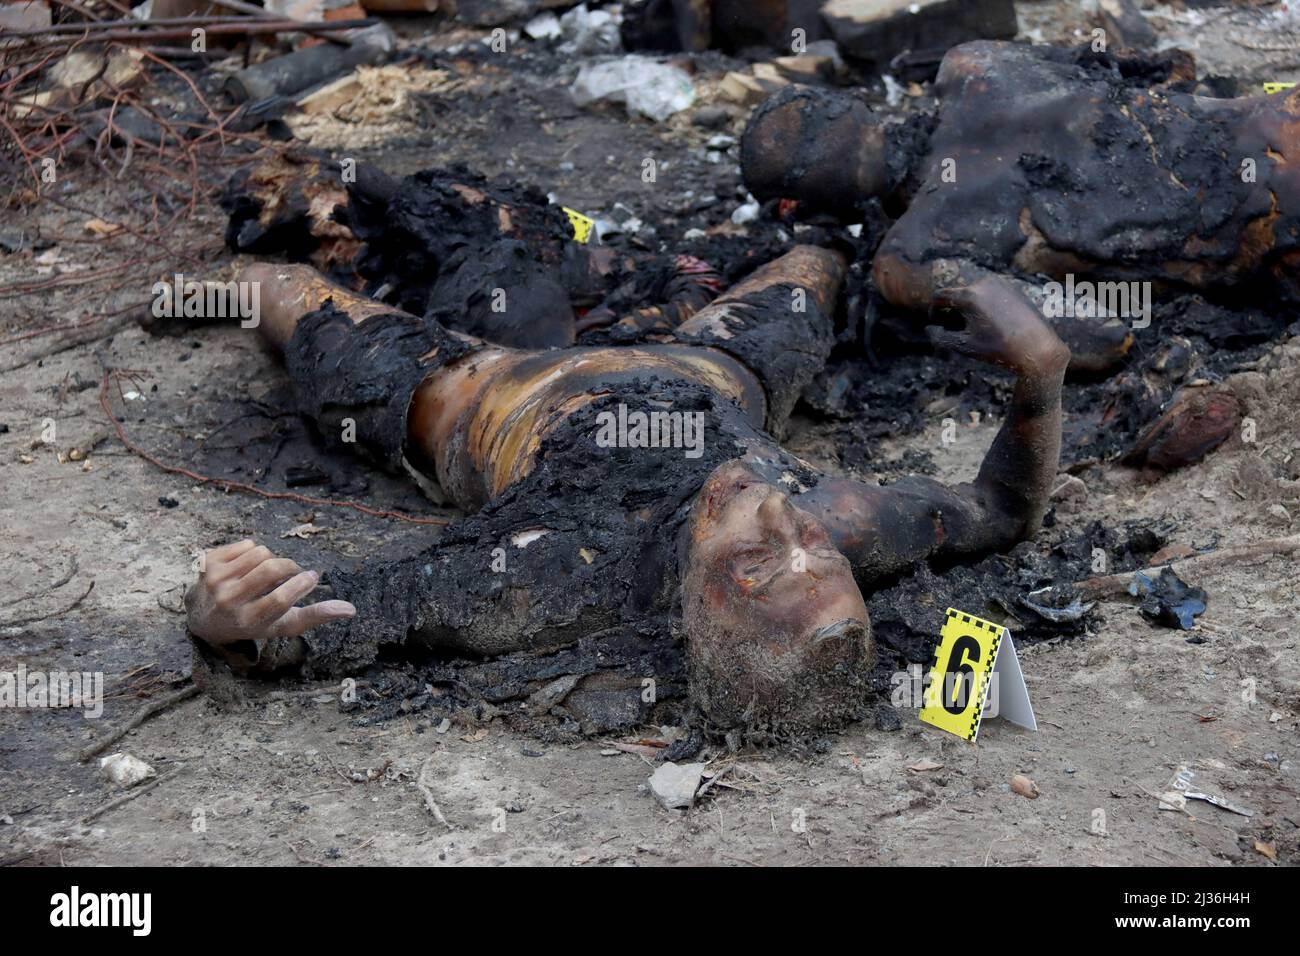 Non Exclusive: BUCHA, UKRAINE- APRIL 5, 2022 - The bodies of civilians killed by Russian occupiers who later attempted to burn them to hide their crim Stock Photo